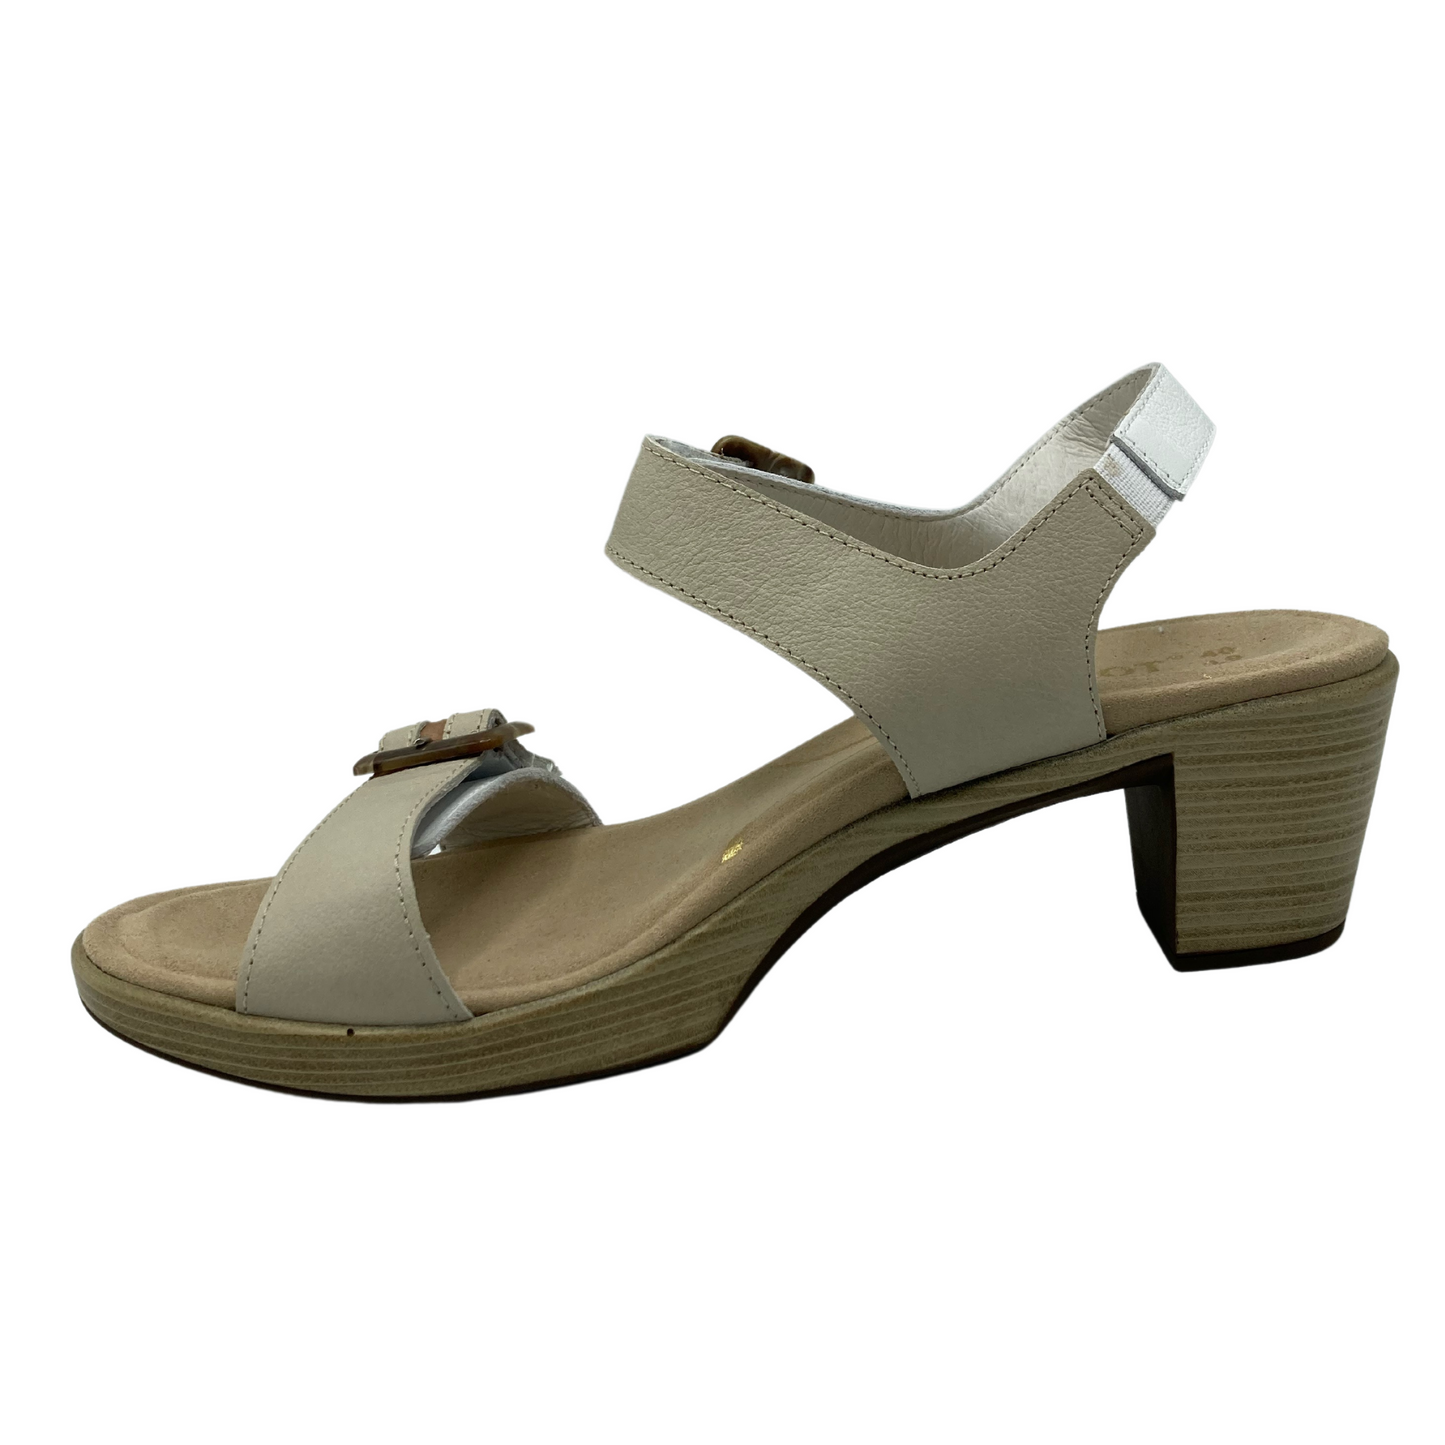 Left facing view of tan and white sandal with chunky heel and buckle straps